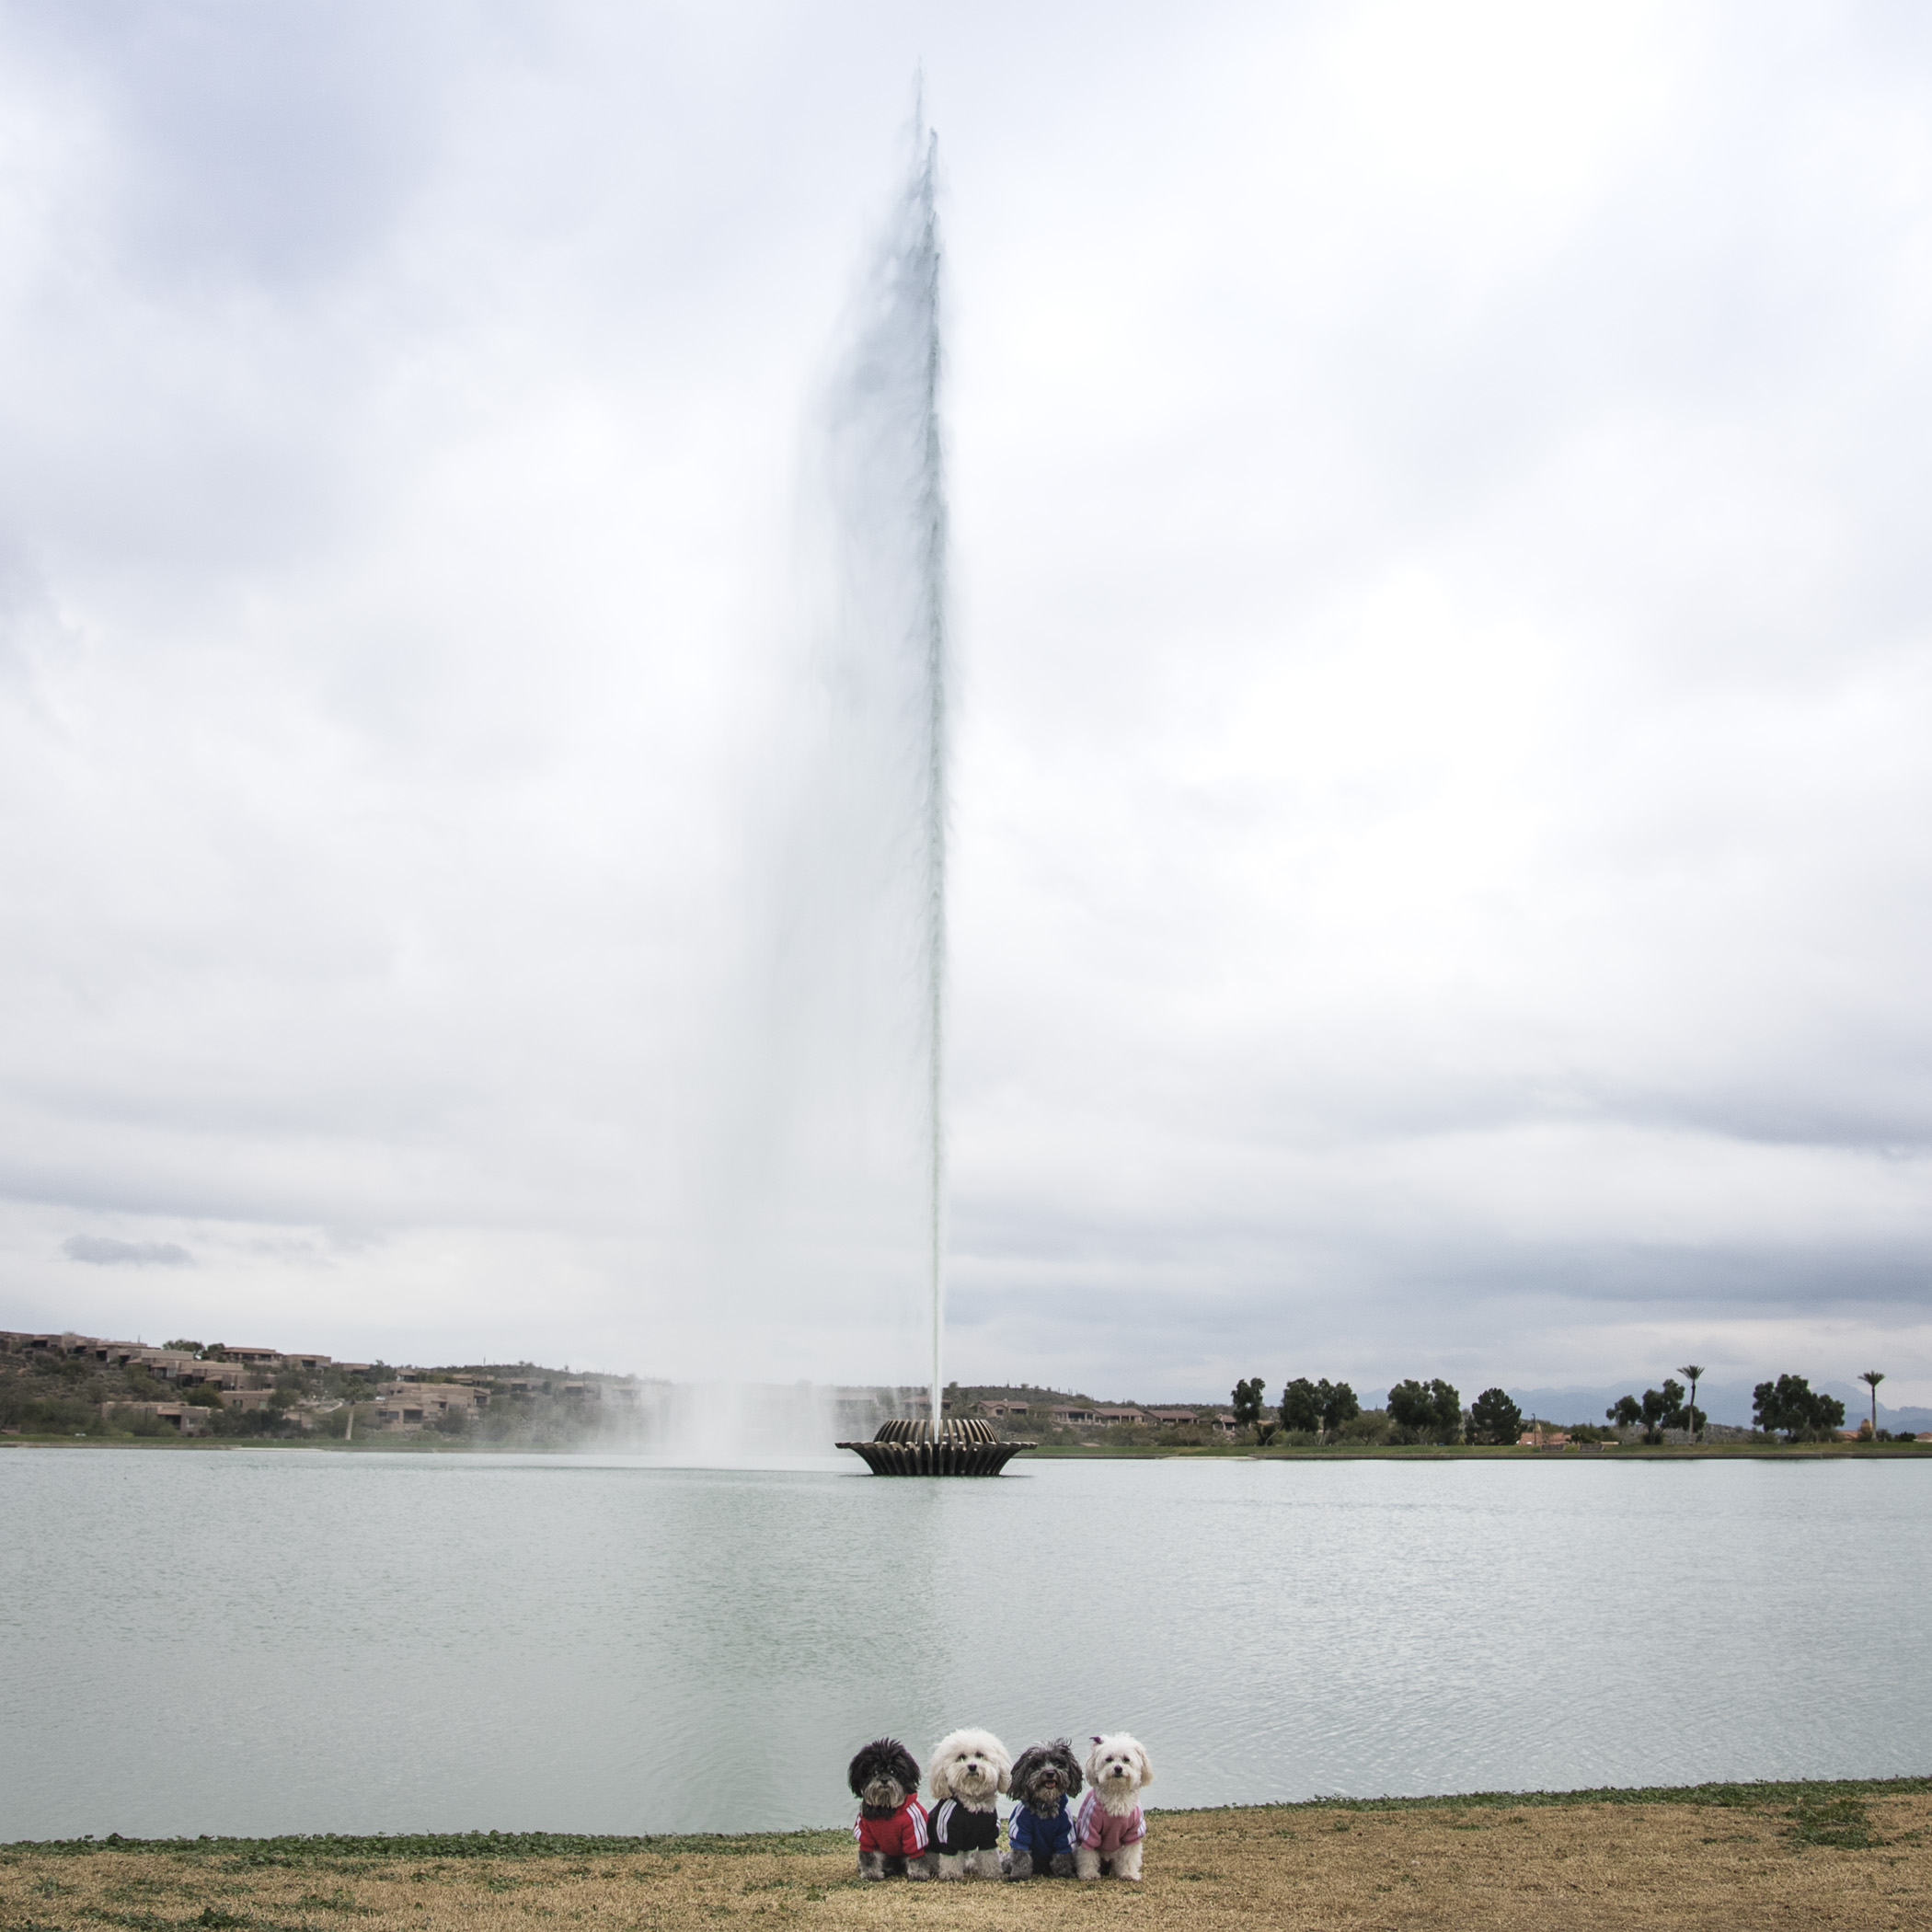  After the race, we headed to Fountain Hills to check out the art scene, but first we had to make a stop at the world’s fourth tallest fountain. We look teeny tiny and we weren’t anywhere close to the fountain! 